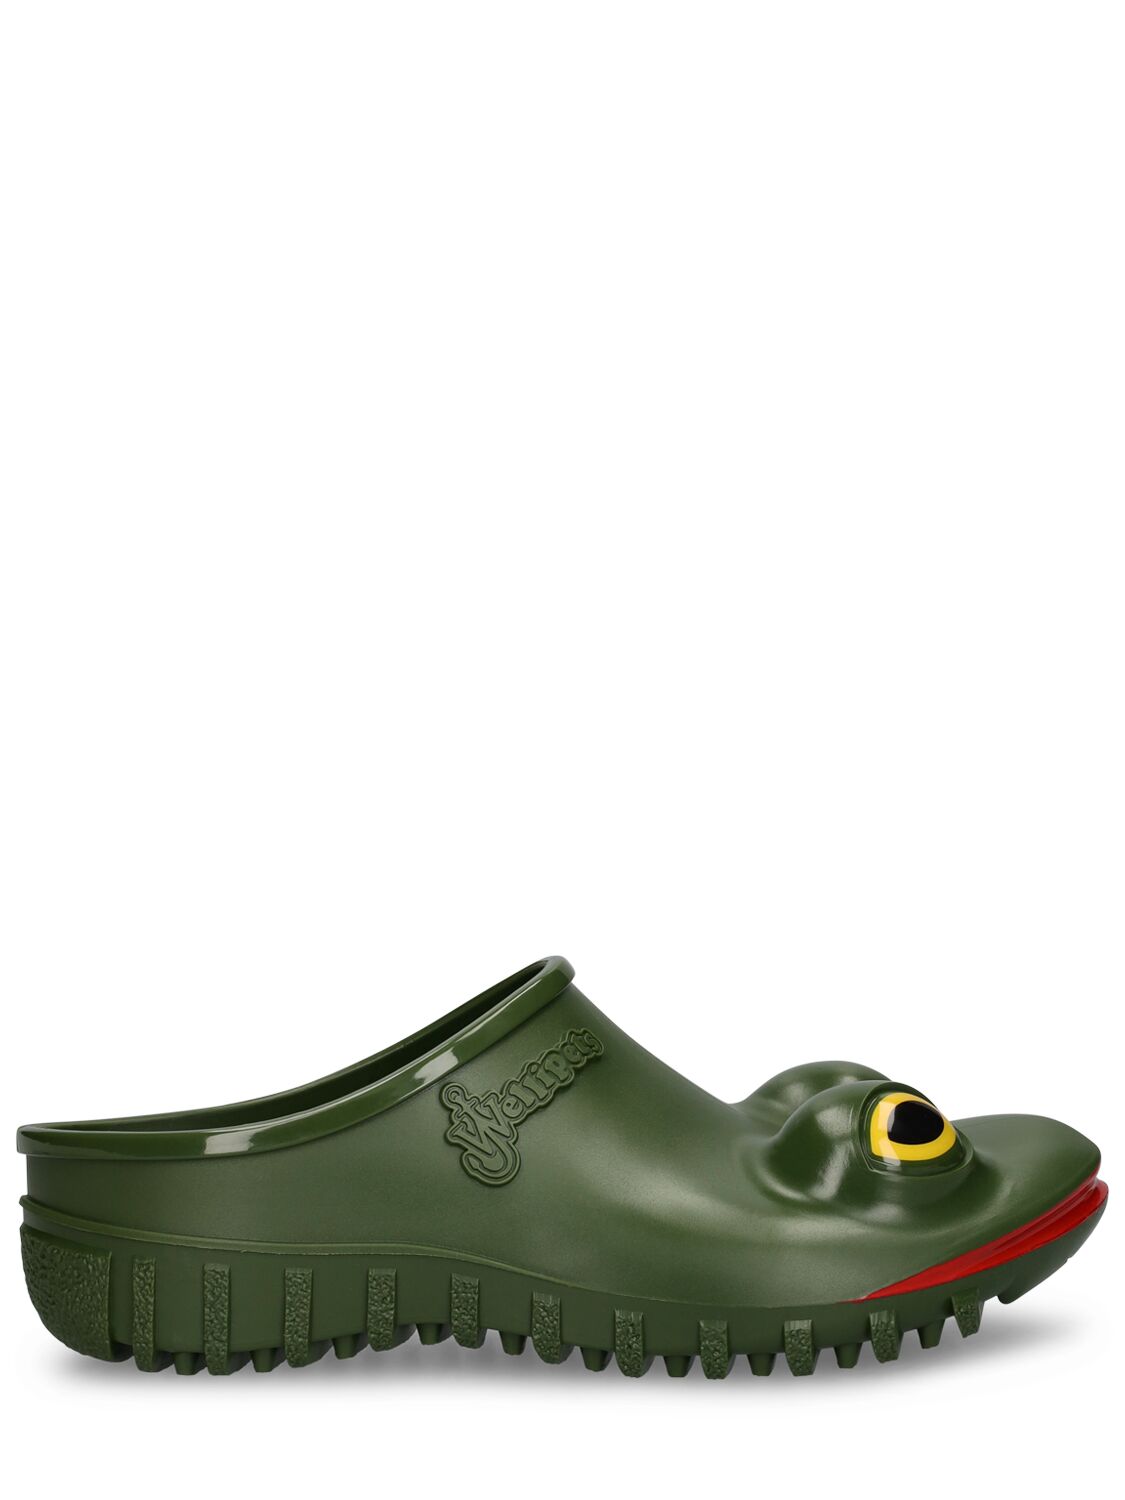 Jw Anderson X Wellipets Frog Clogs